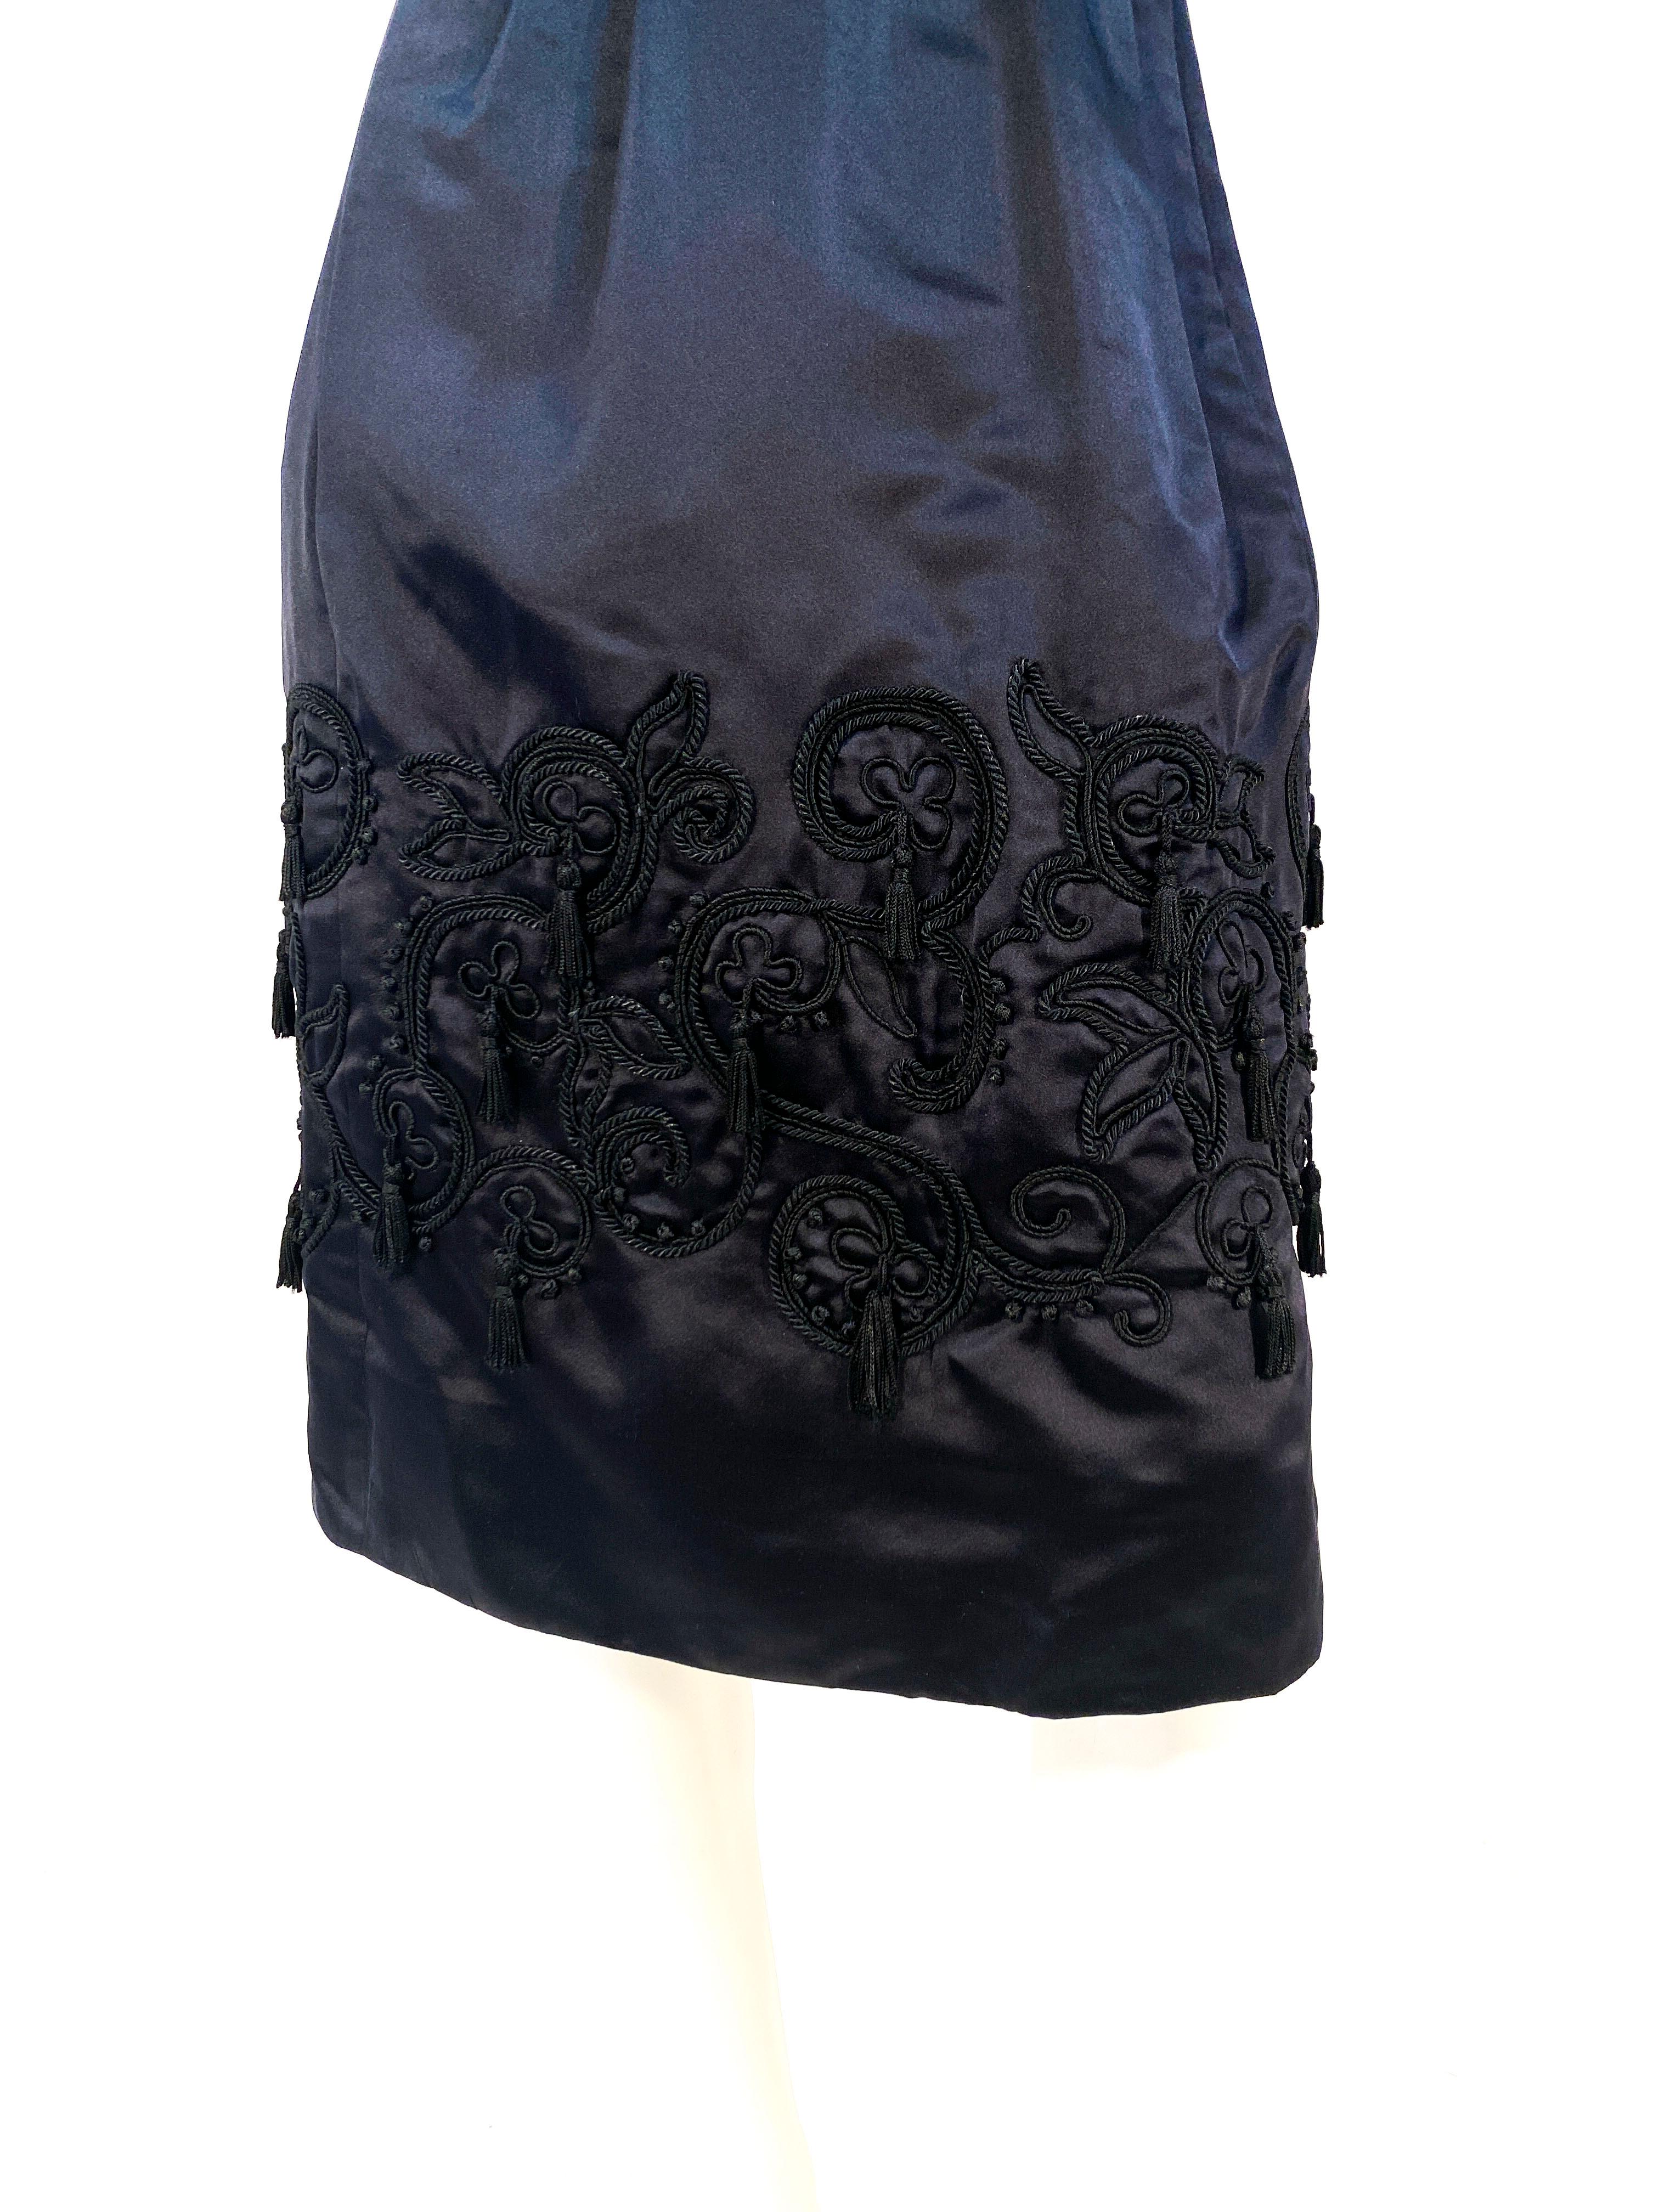 1960s custom made and handmade black silk satin cocktail dress featuring a wide boarder embroidery of soutache, french knots, and tassels located on the bottom of the skirt. The dress has a hand-set zipper back closure and a piped rope waist that